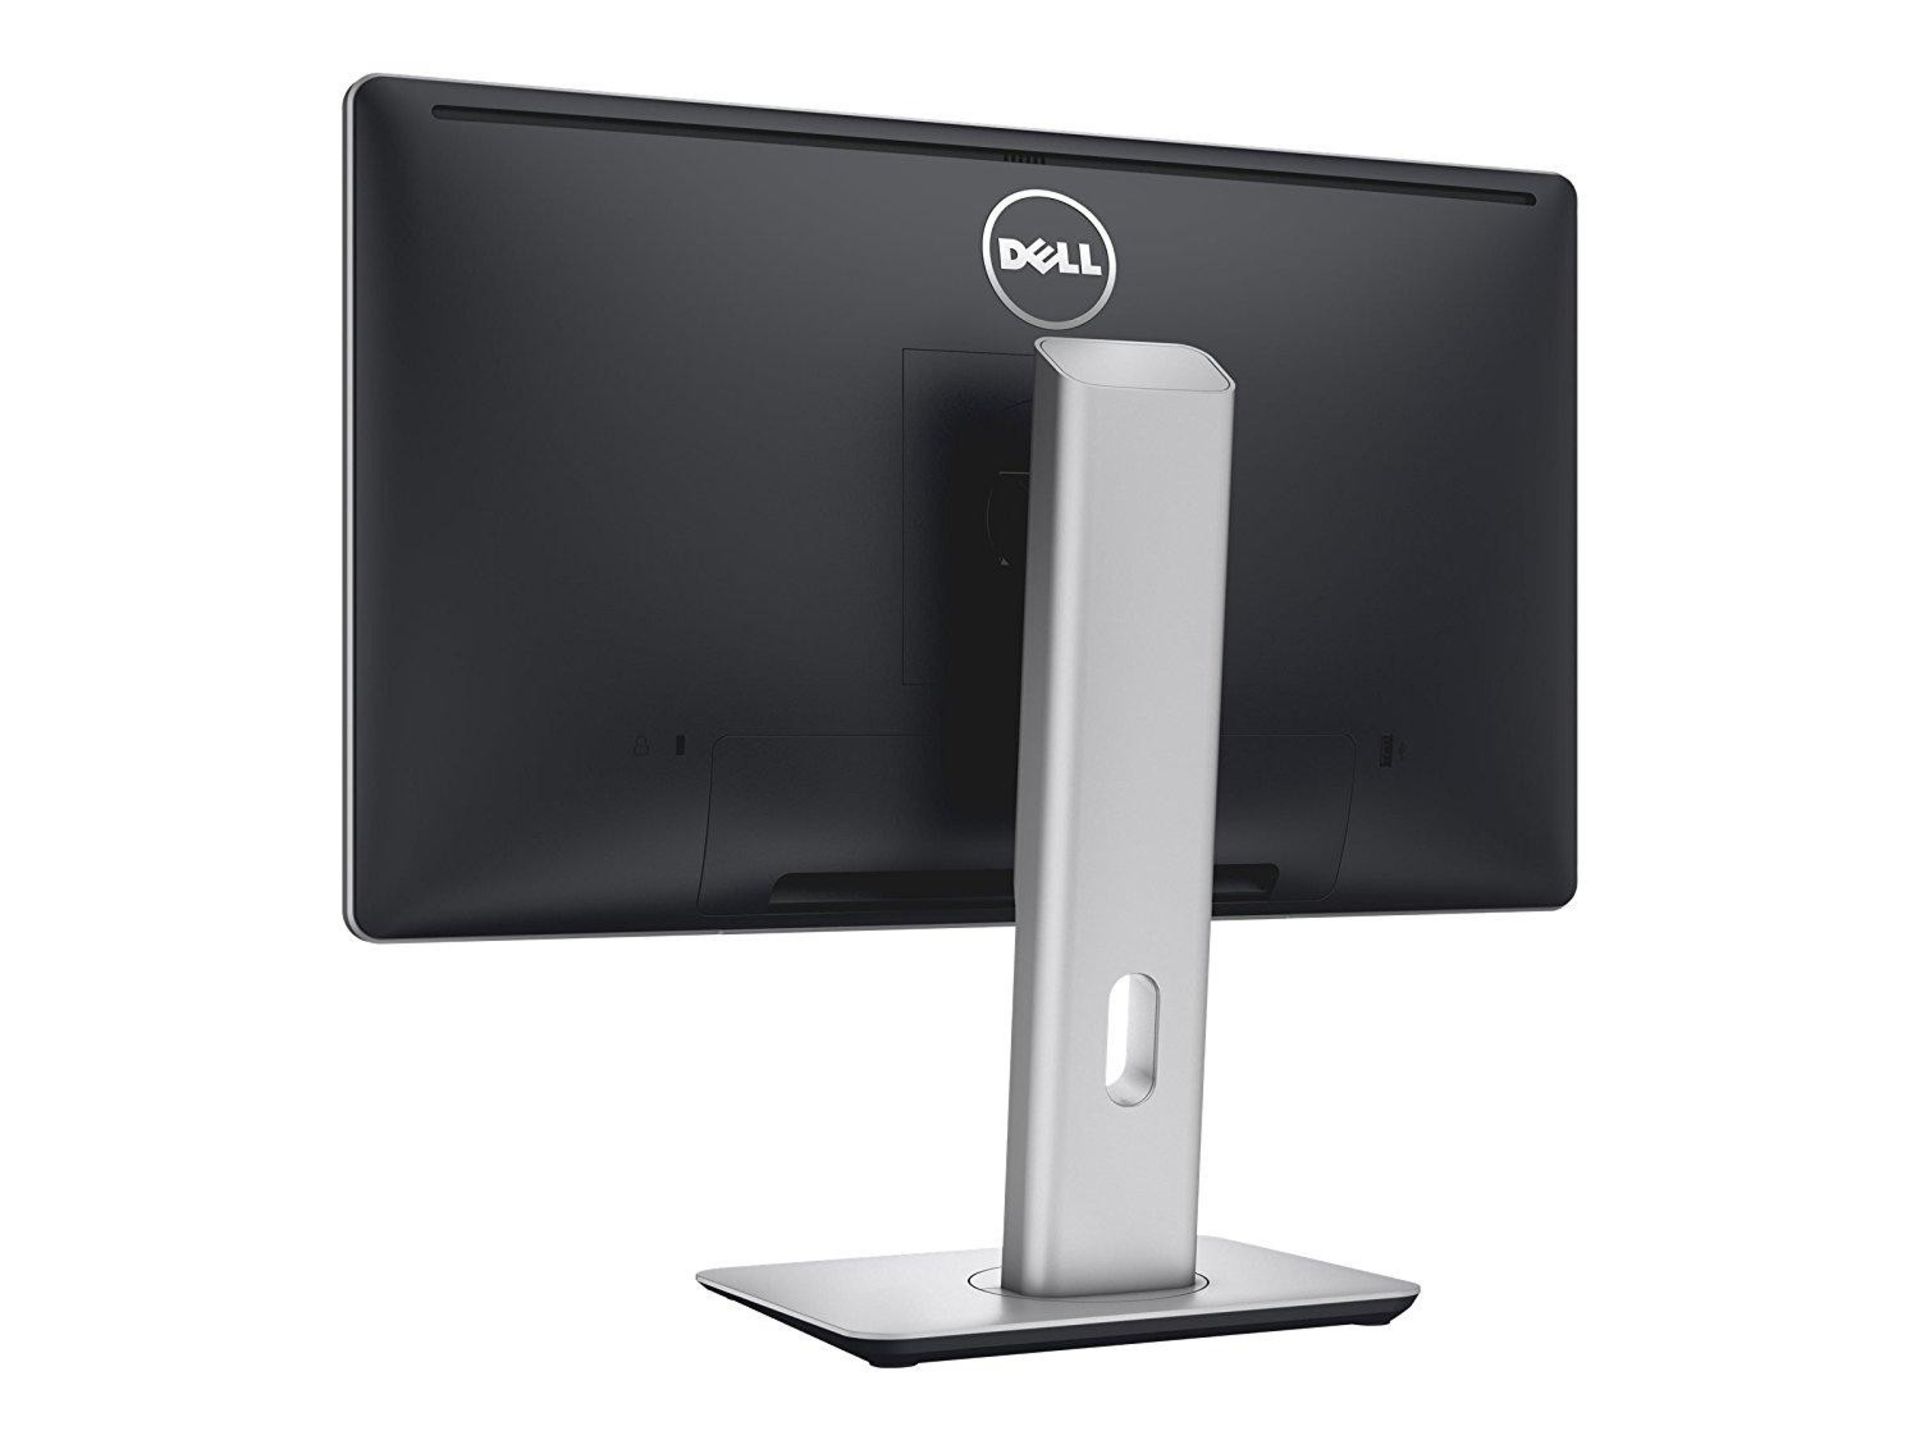 1 x Dell E2214HB 1920 x 1080 Resolution 22" WideScreen Monitor - CL285 - Includes Power & Video - Image 2 of 2